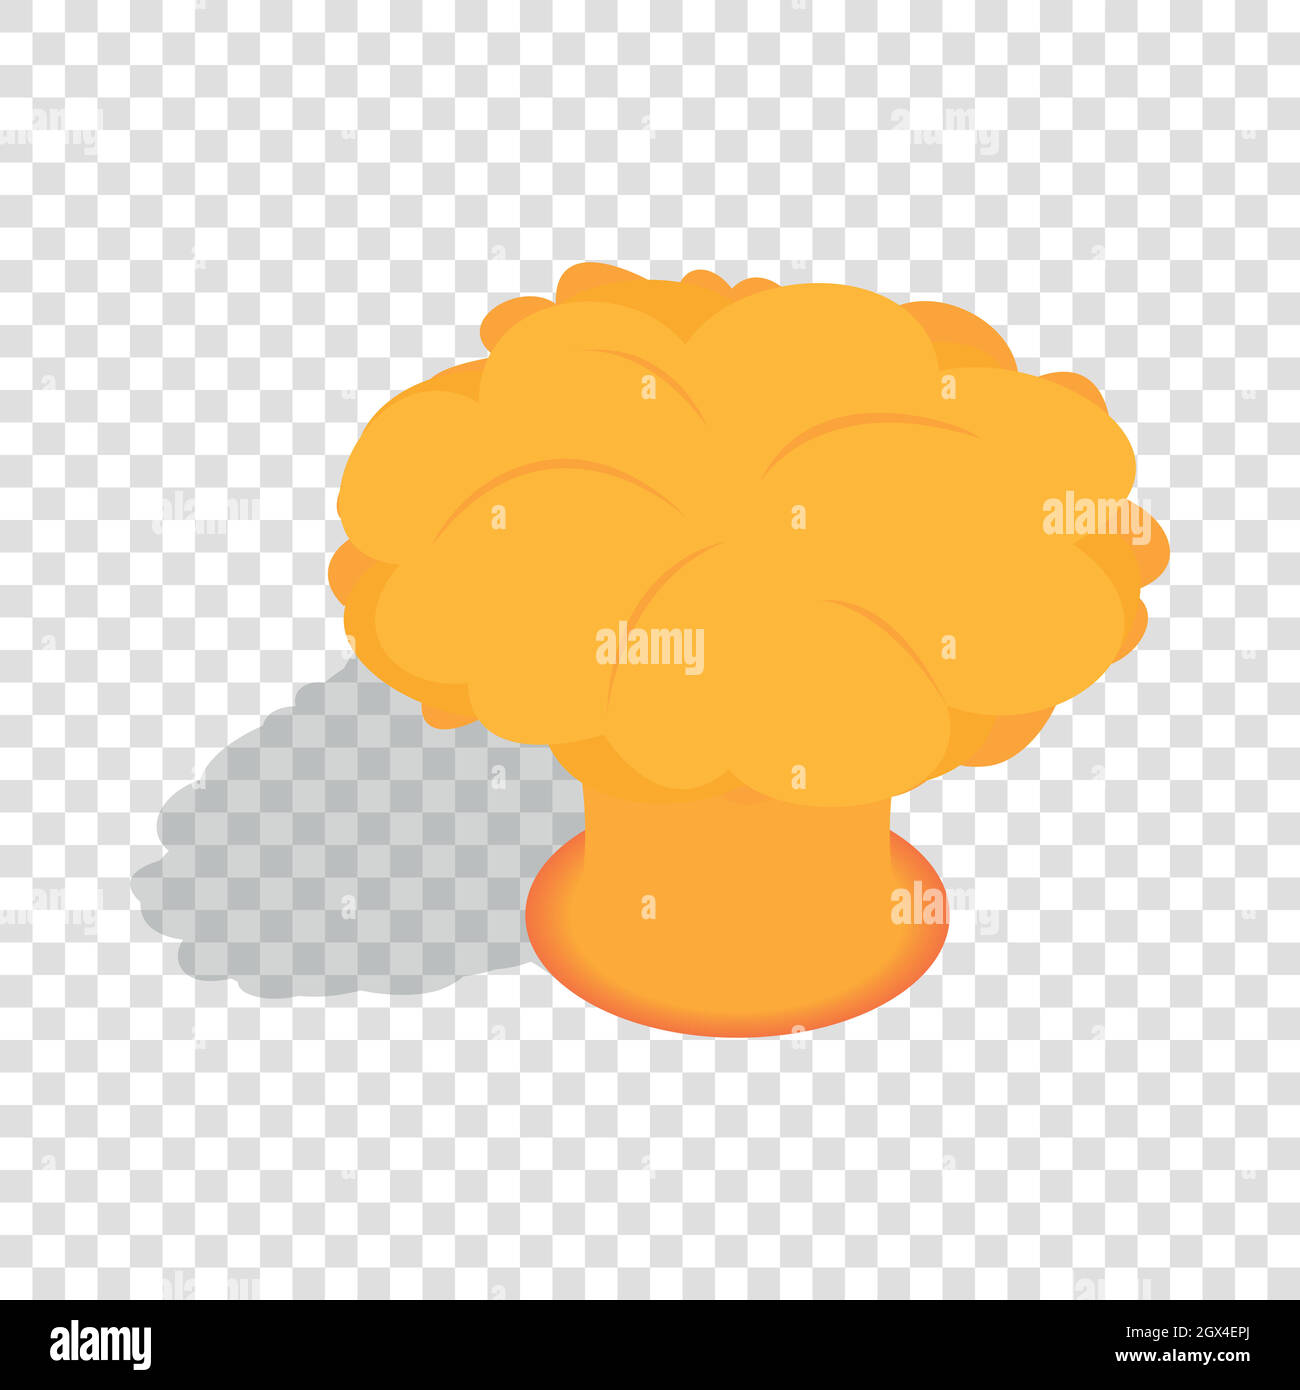 Nuclear explosion isometric icon Stock Vector